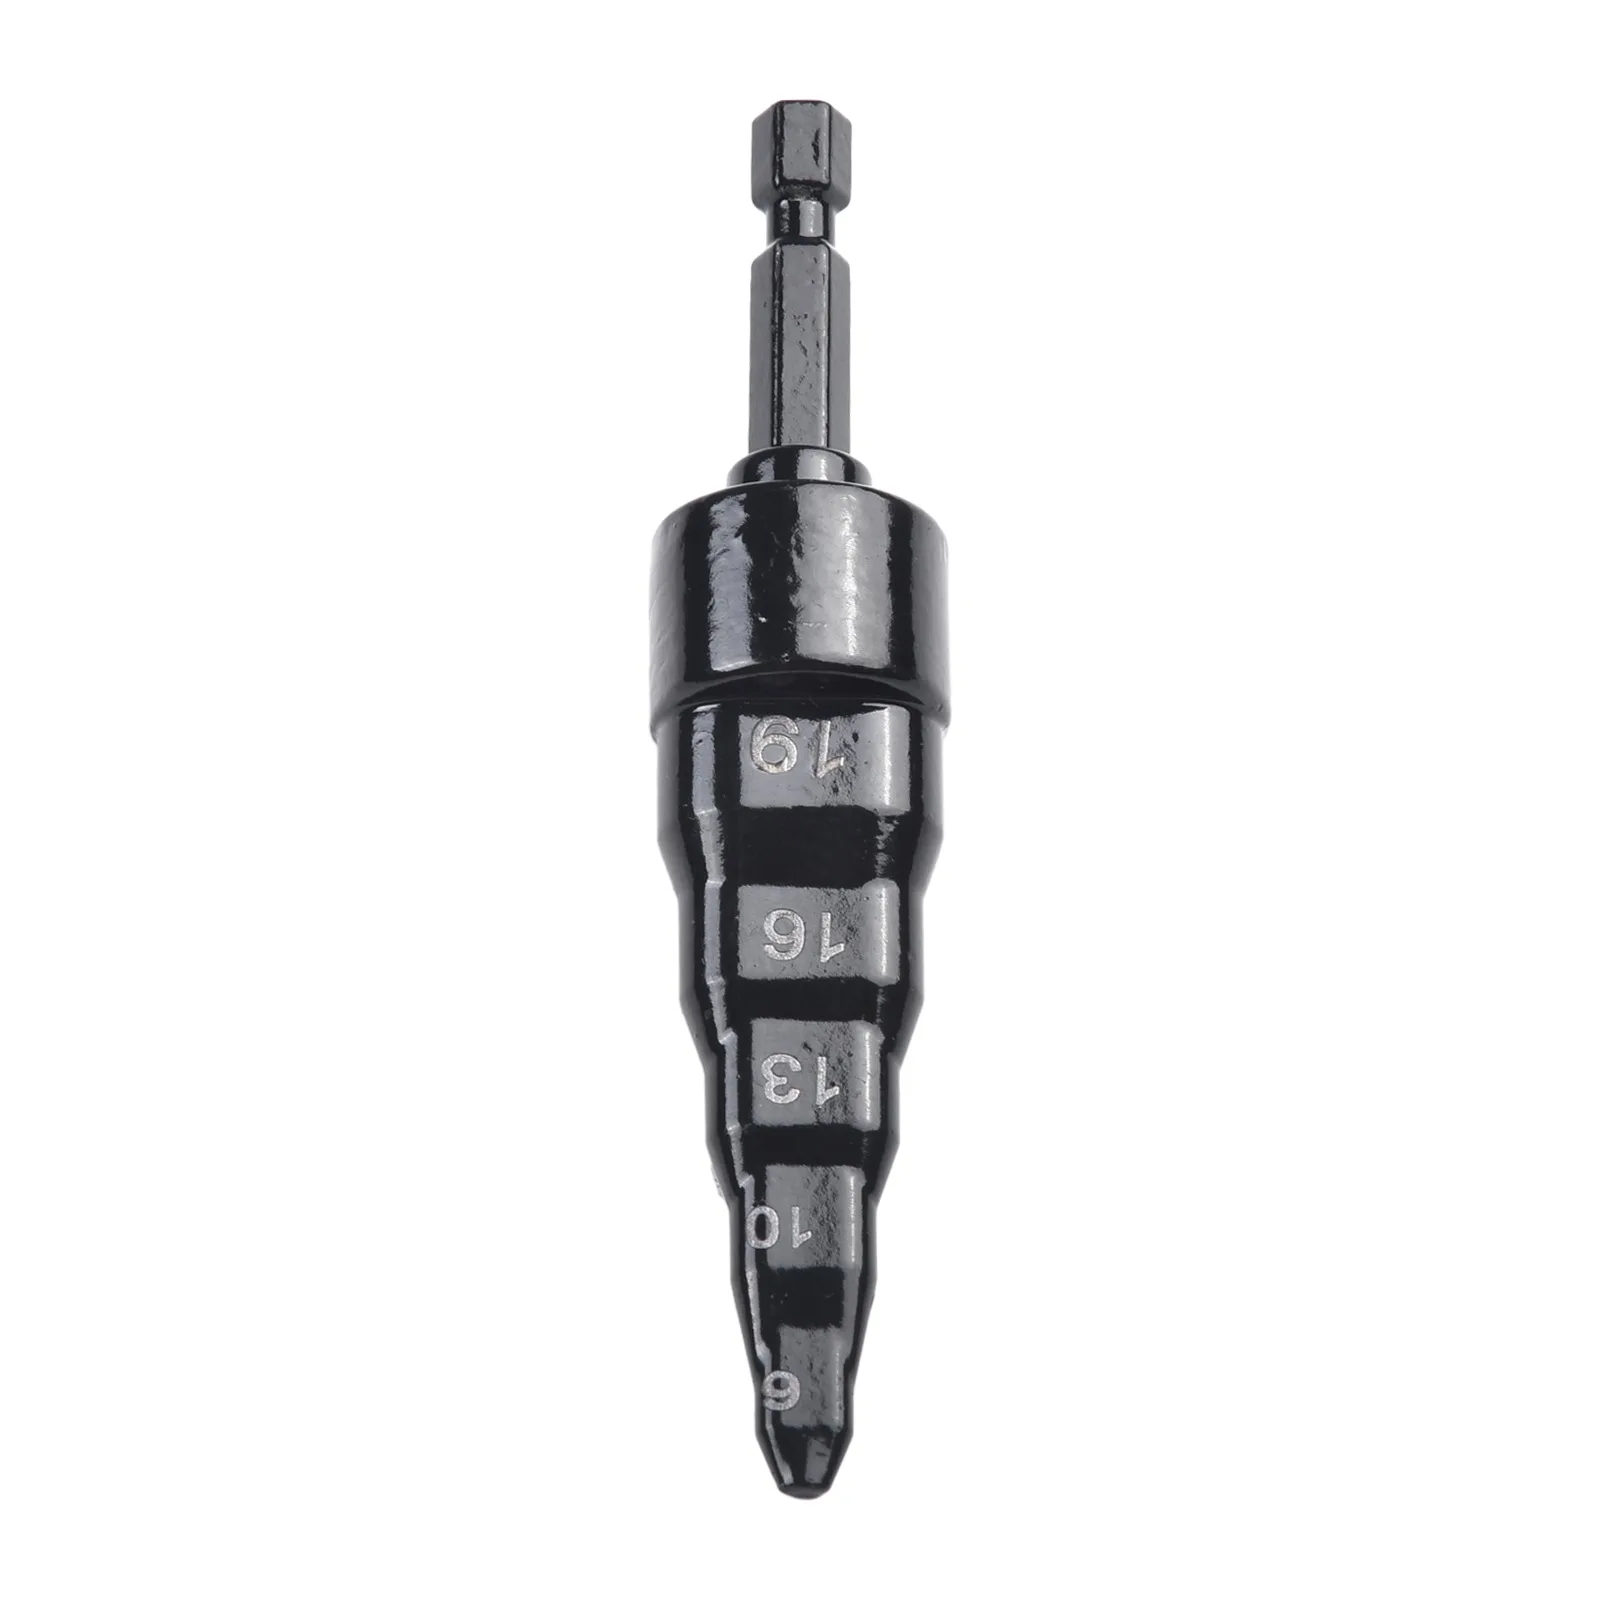 

Reliable 5 in 1 Repair Tool Air Conditioner Copper Pipe Expander Swaging Drill Bit Set Achieve Flawless Expansion